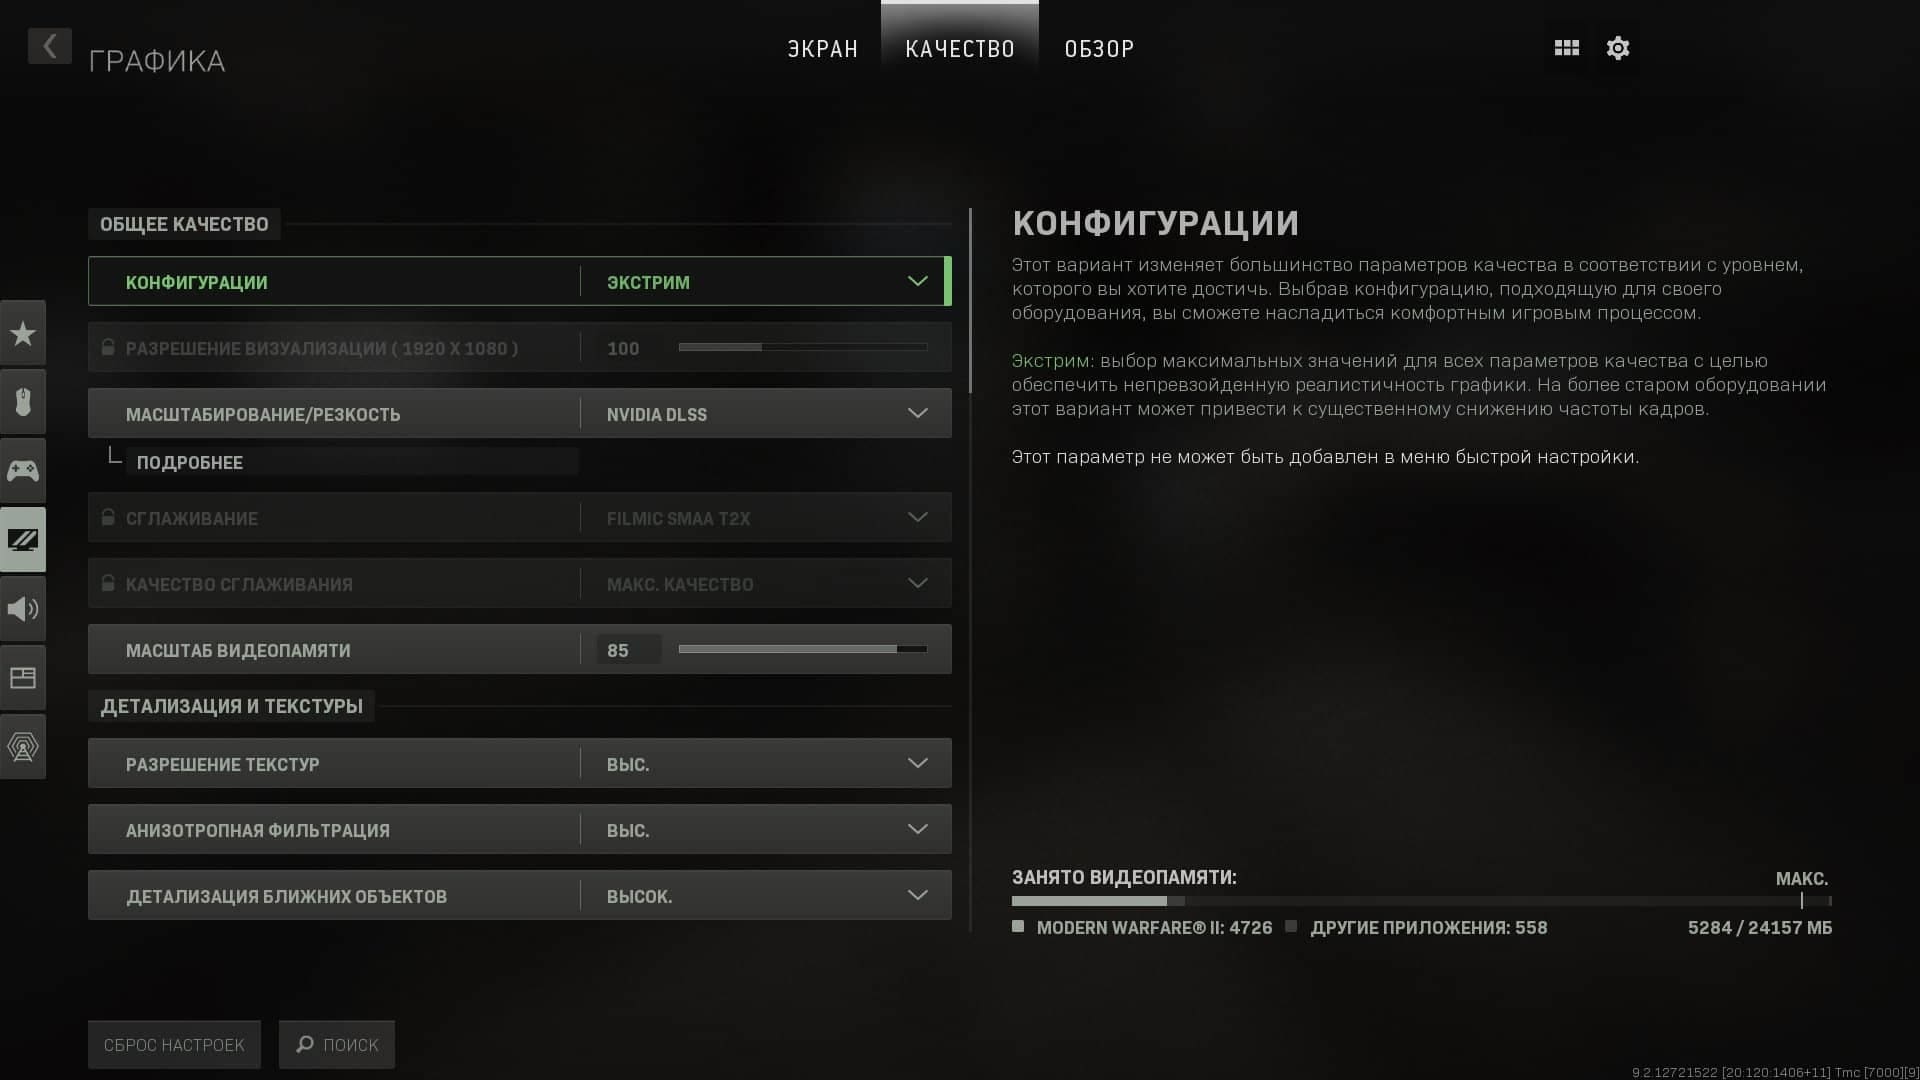 Please make sure plusmaster client is updated and running call of duty ghosts как исправить фото 77